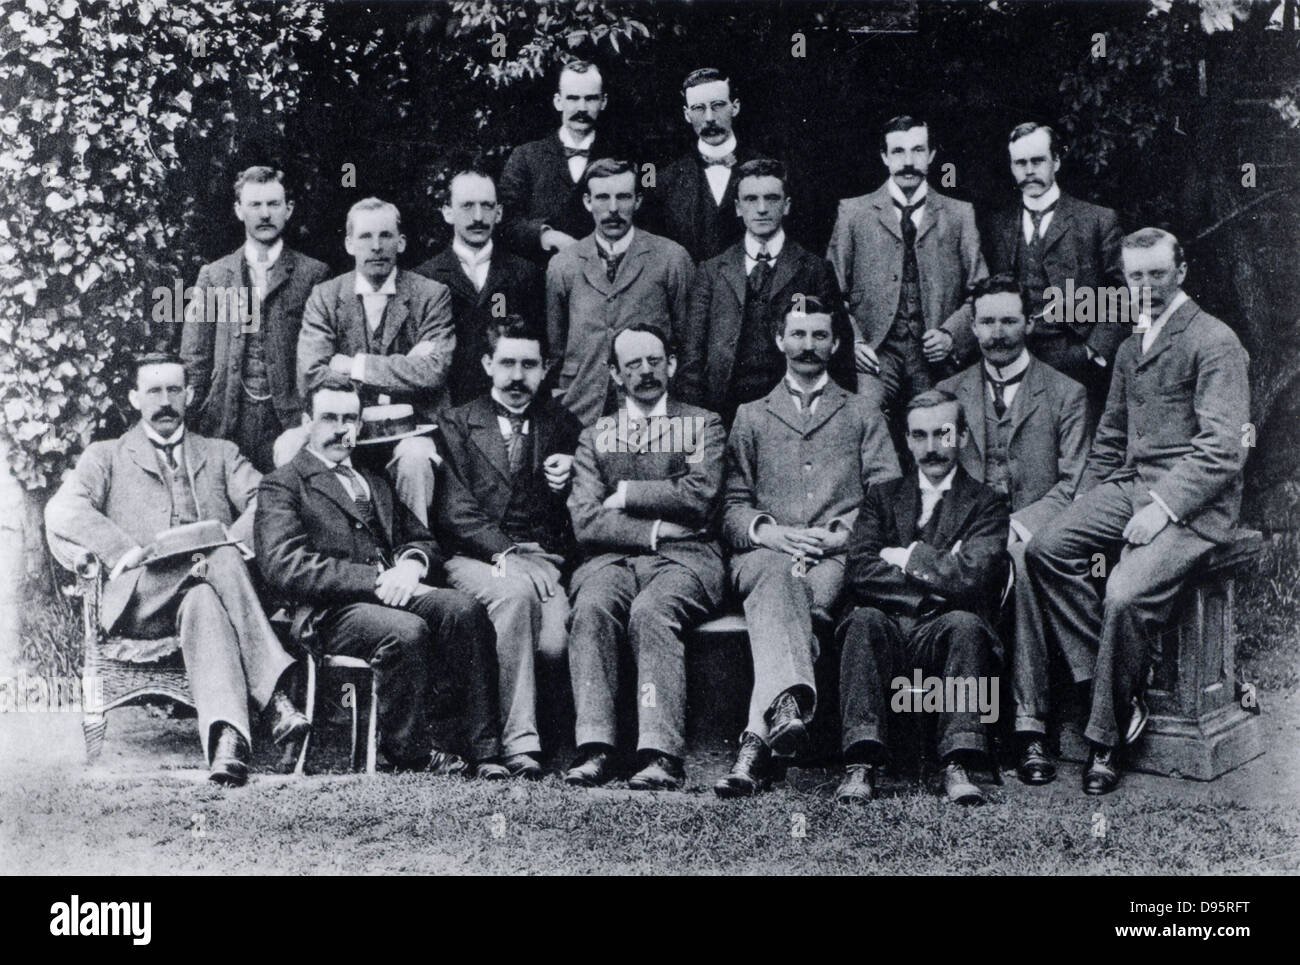 Cavendish Laboratory, Cambridge, England: research students, 1898.  J(oseph) J(ohn) Thomson (1856-1940) is in the centre of the front row with his arms crossed. In the middle row are C(harles) T(homson) R(ees) Wilson and Ernest Rutherford (1871-1937), 3rd and 4th from left respectively.  From 'Recollections and Reflections' by JJ Thomson (London, 1936). Stock Photo